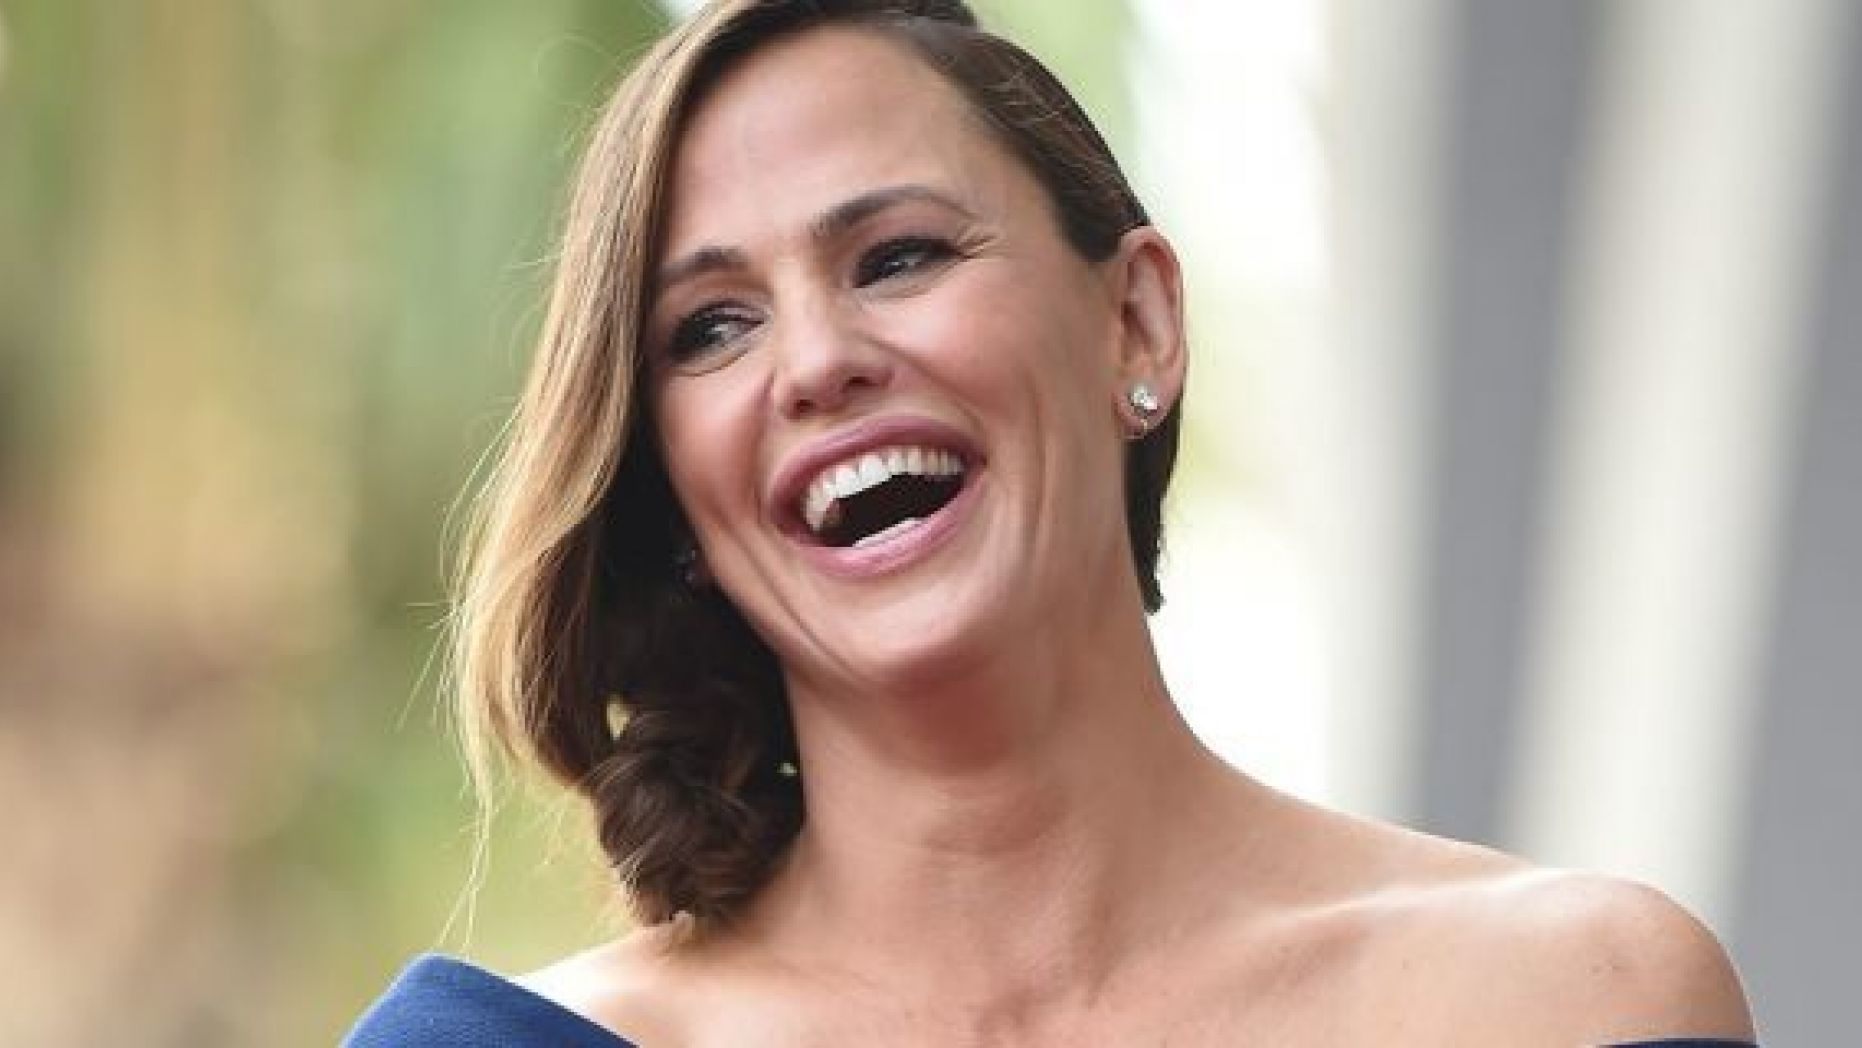 Actress Jennifer Garner took to Instagram to share a photo of herself dressed in a marching band uniform and playing the saxophone.